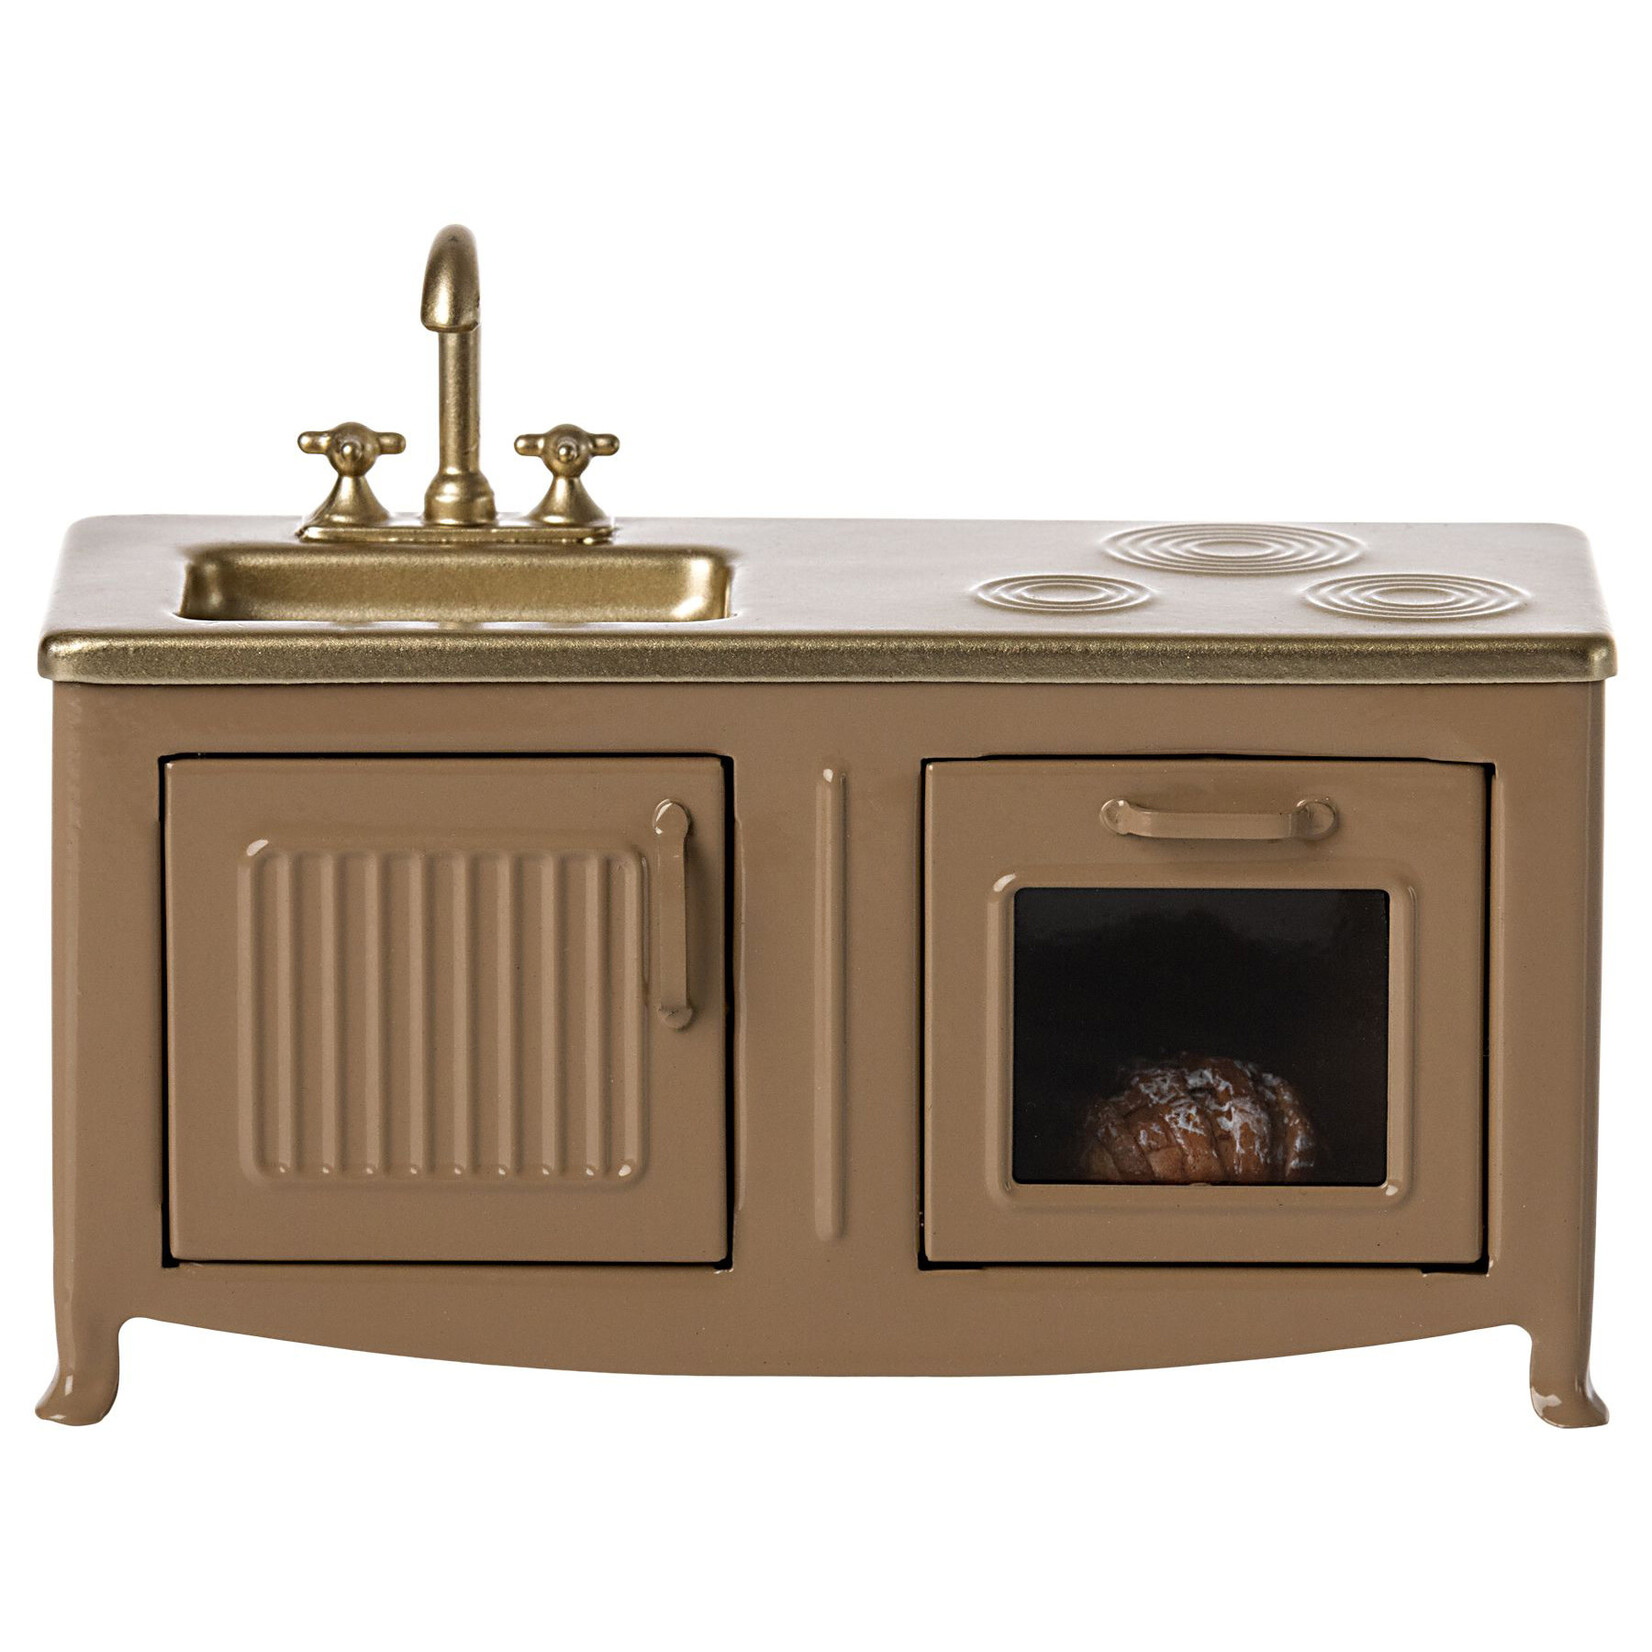 Maileg Maileg Kitchen for Mouse - Light brown